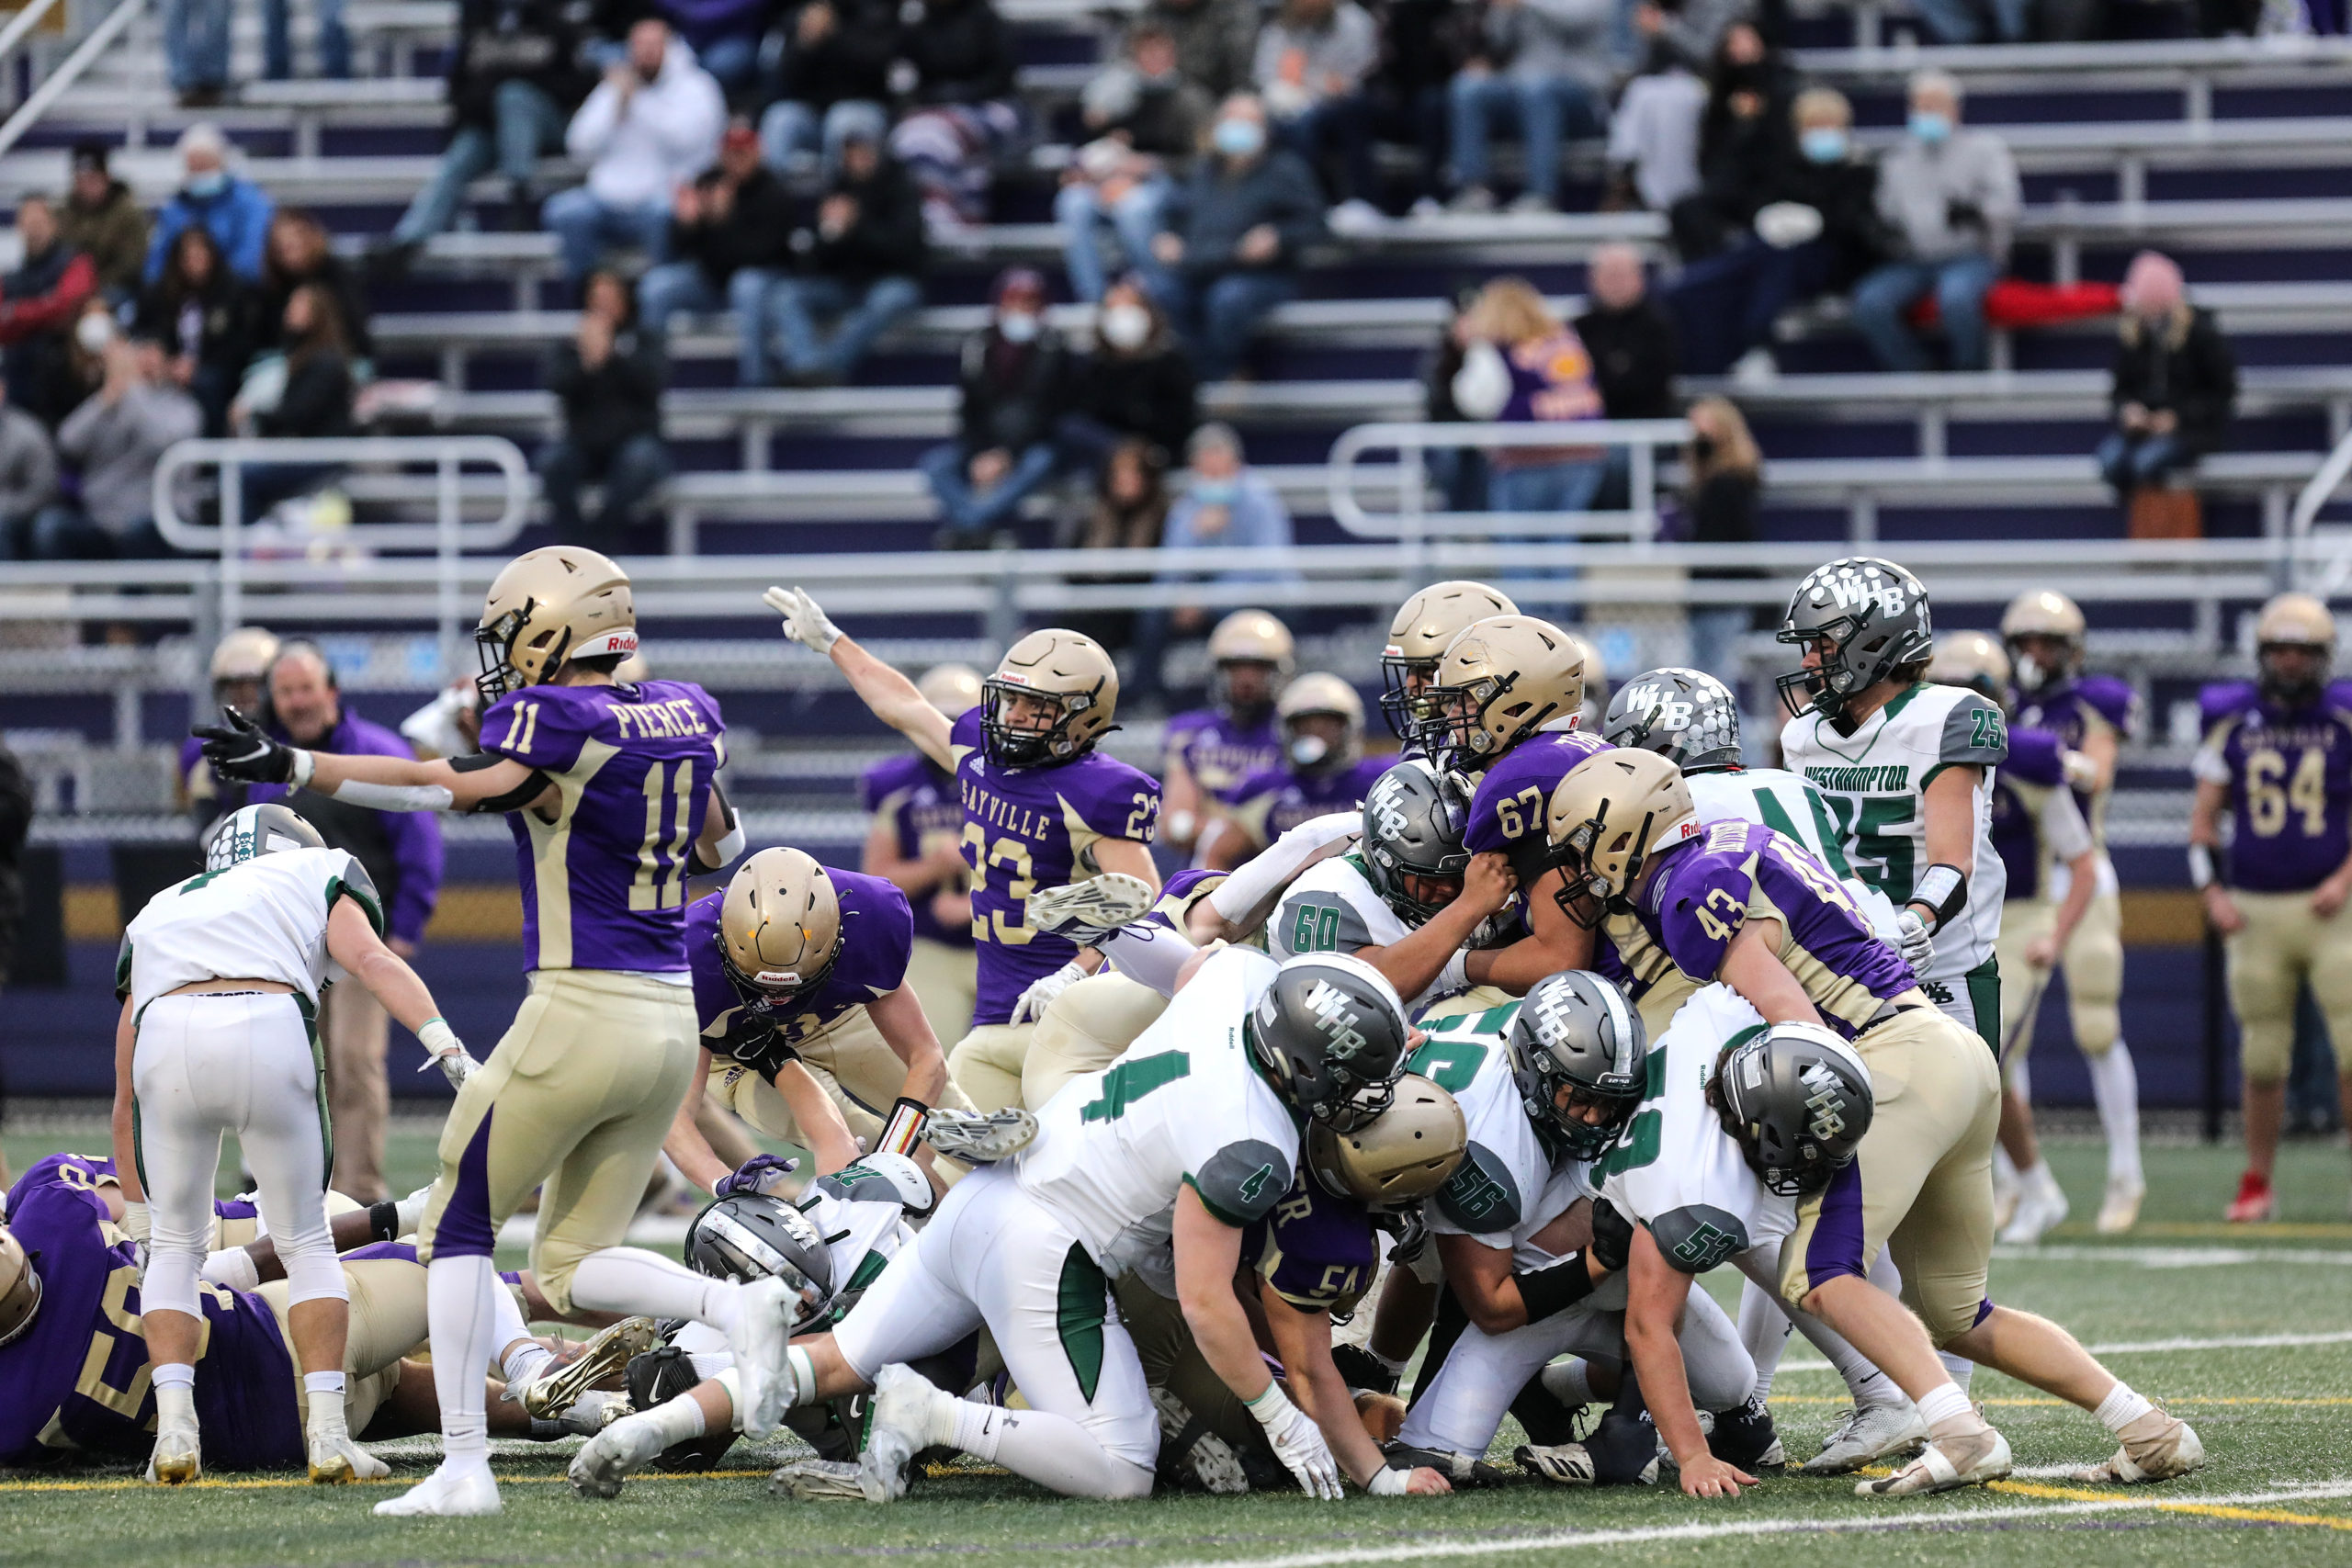 Westhampton Beach and Sayville football players pile up on a loose ball.